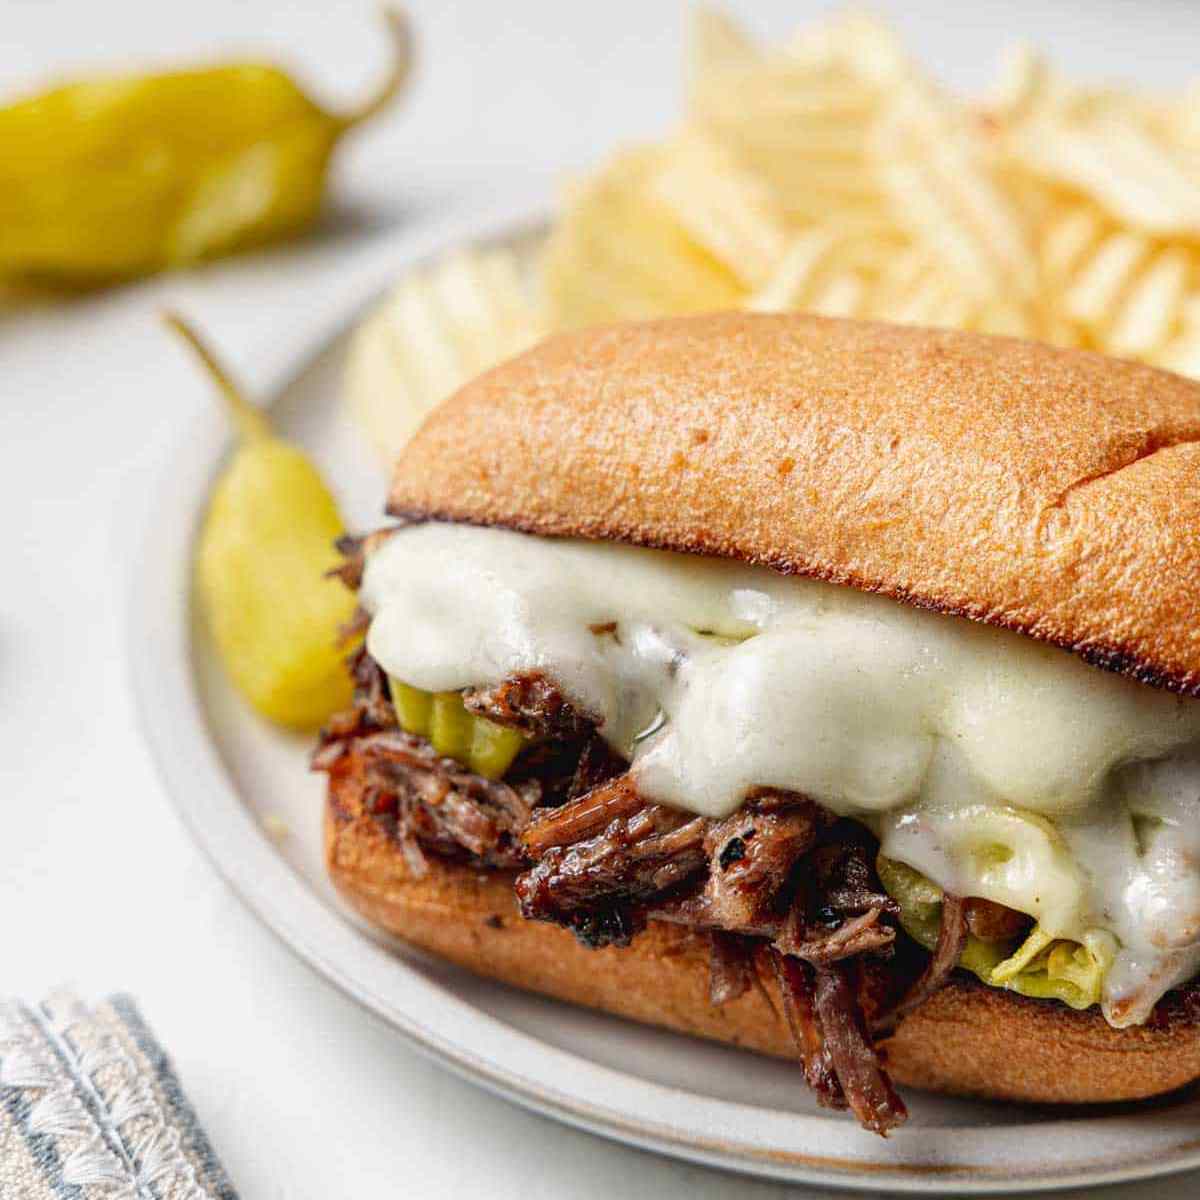 Italian shredded beef sandwich on a white plate with chips in the back.